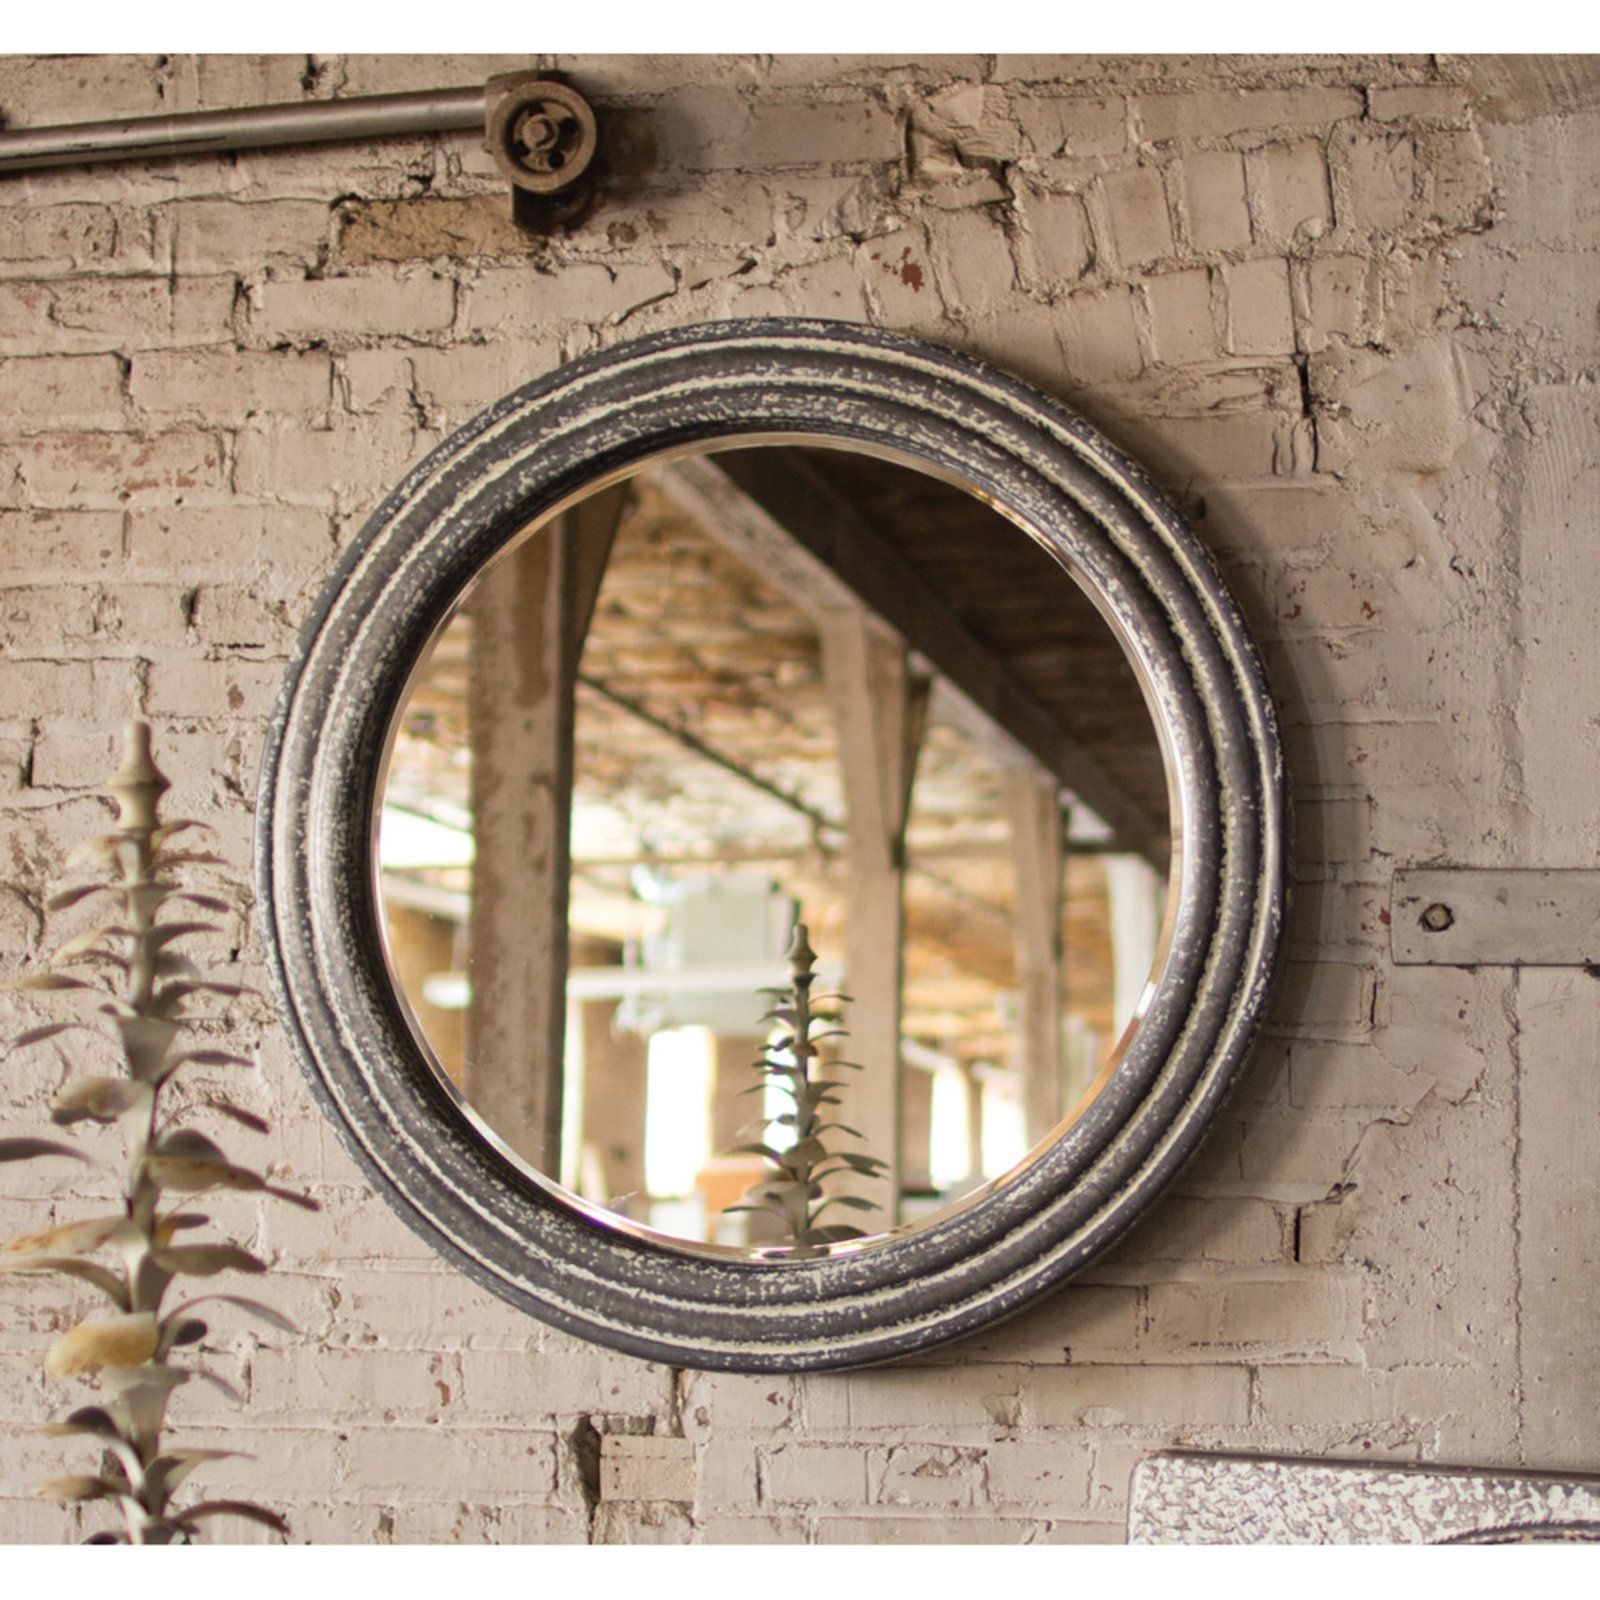 Farmhouse Chic Round Mirror | Accent Mirrors, Accent Wall, Mirror Within Lajoie Rustic Accent Mirrors (View 14 of 15)